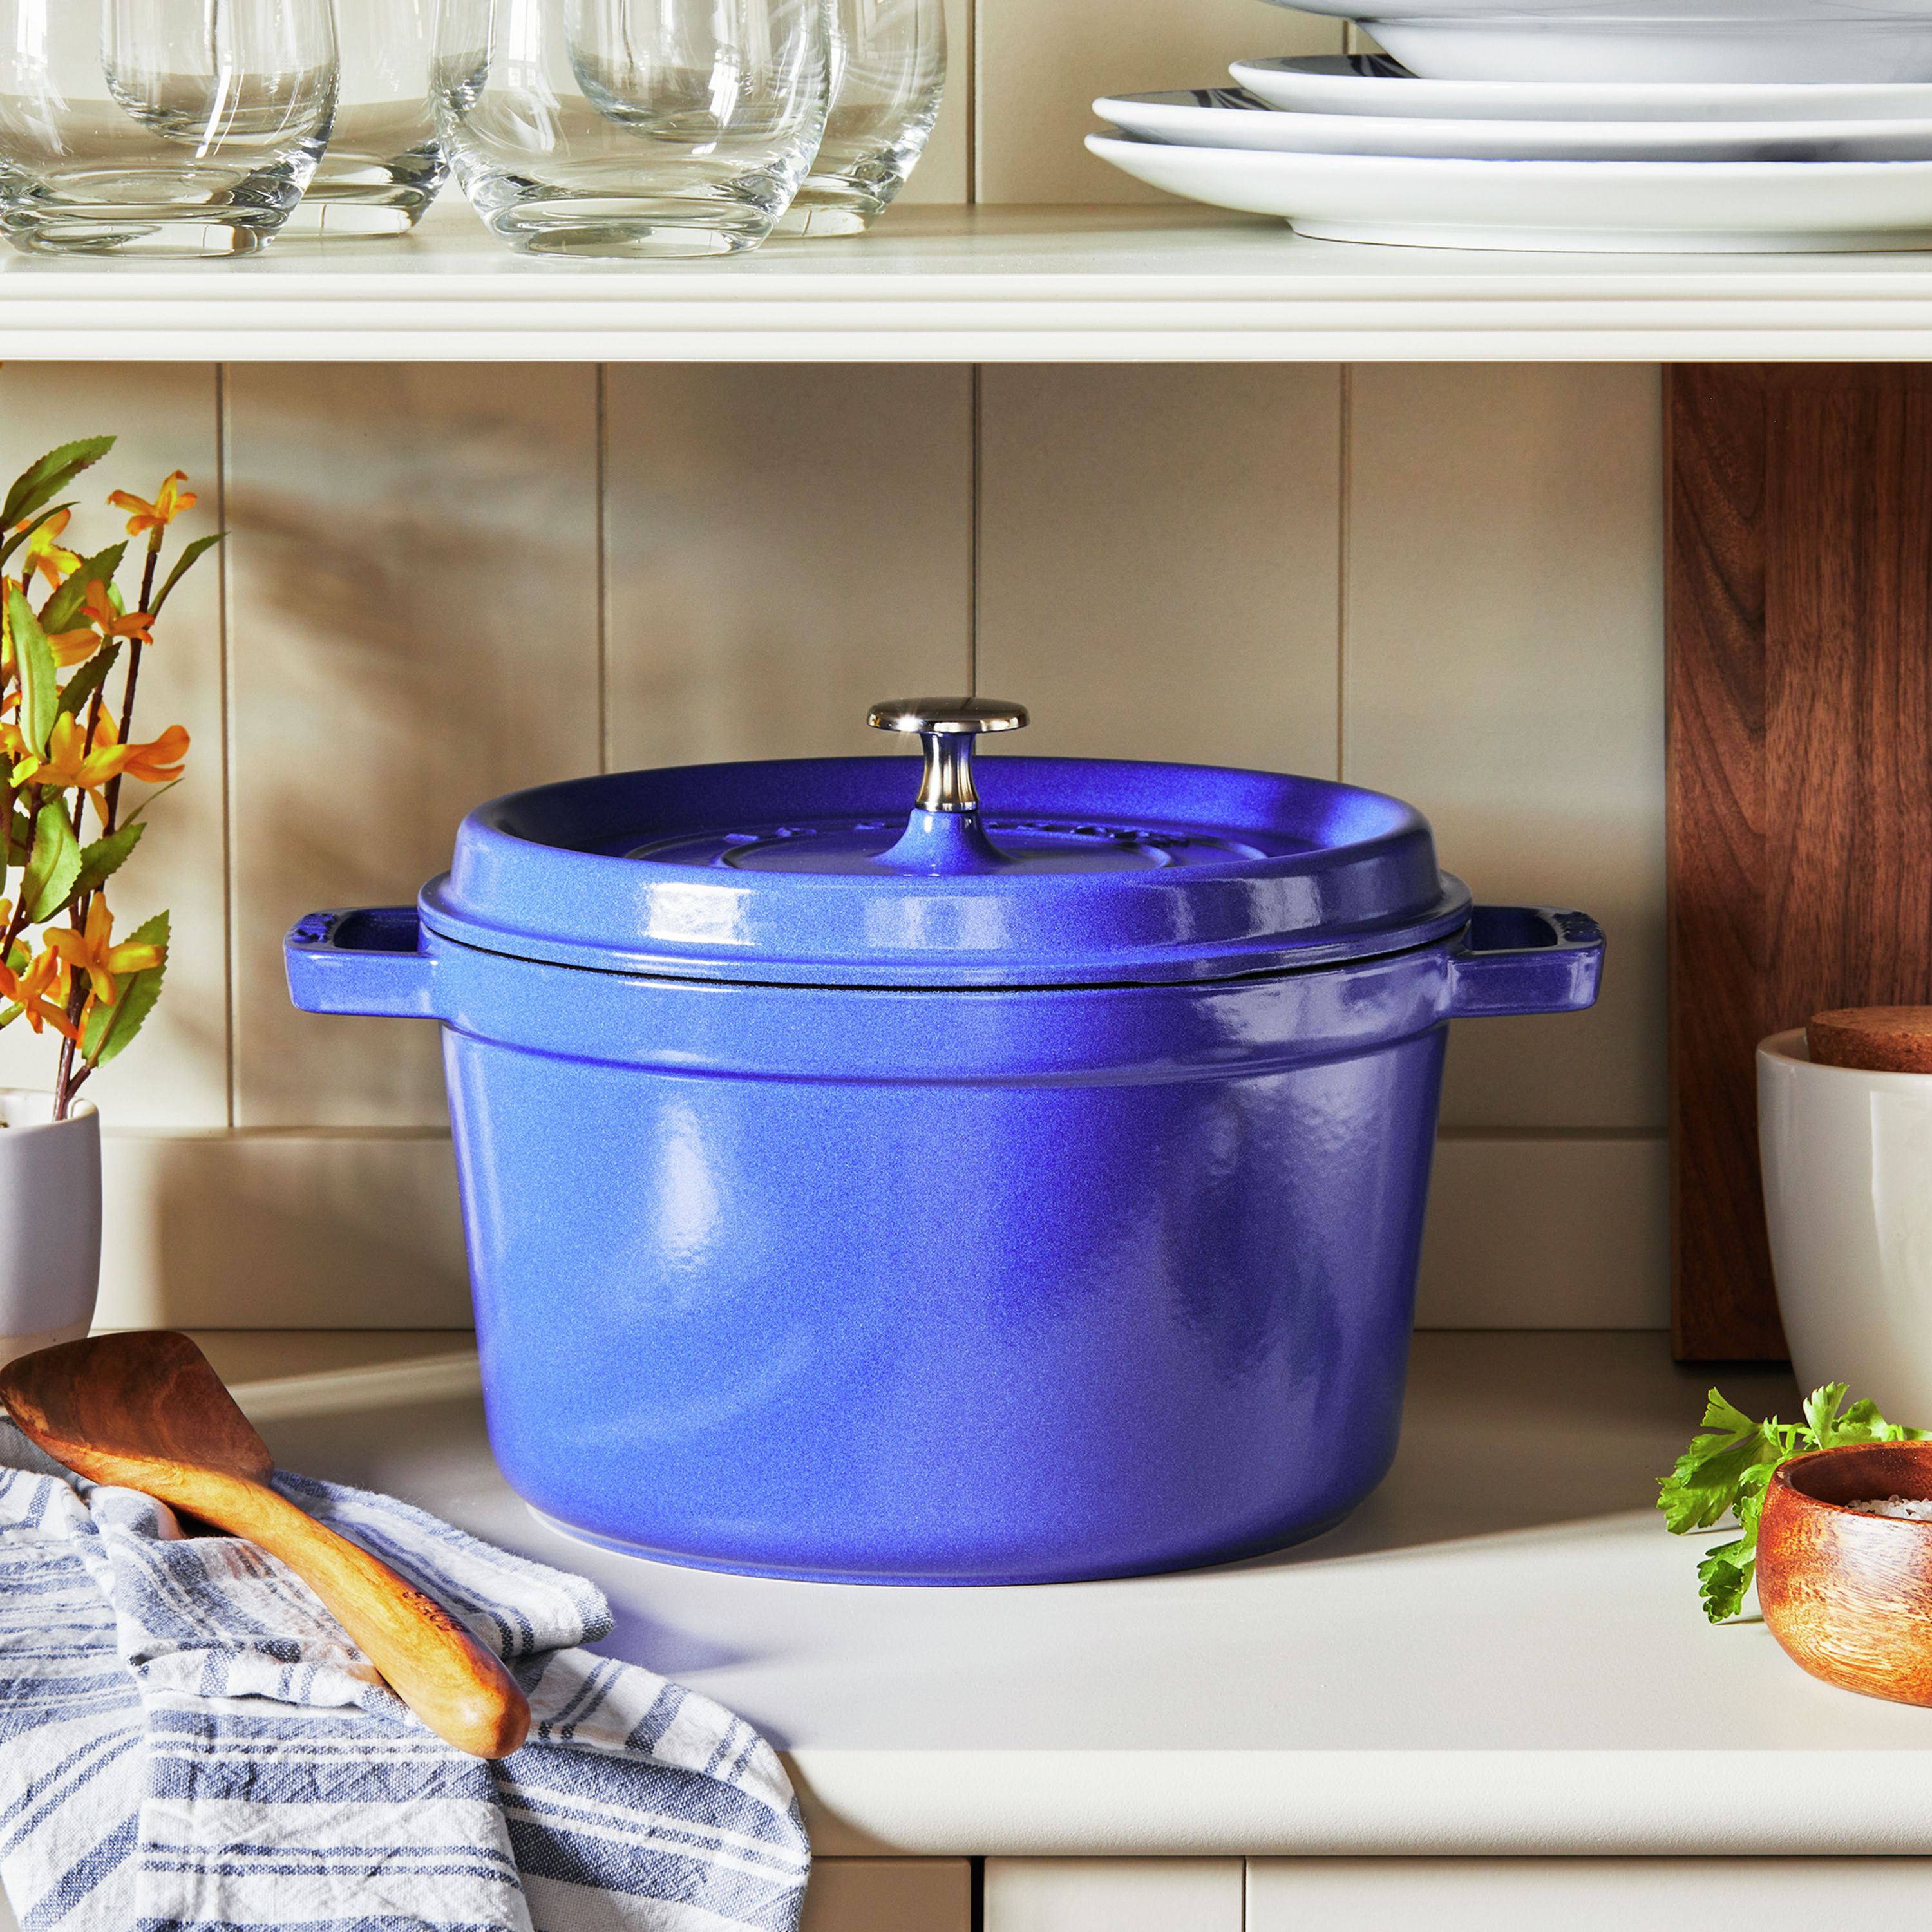 I finally got my hands on one of these and I'm thrilled! What should I make  first? This is the Staub 5 qt Tall Cocotte and it's my first Dutch Oven. 